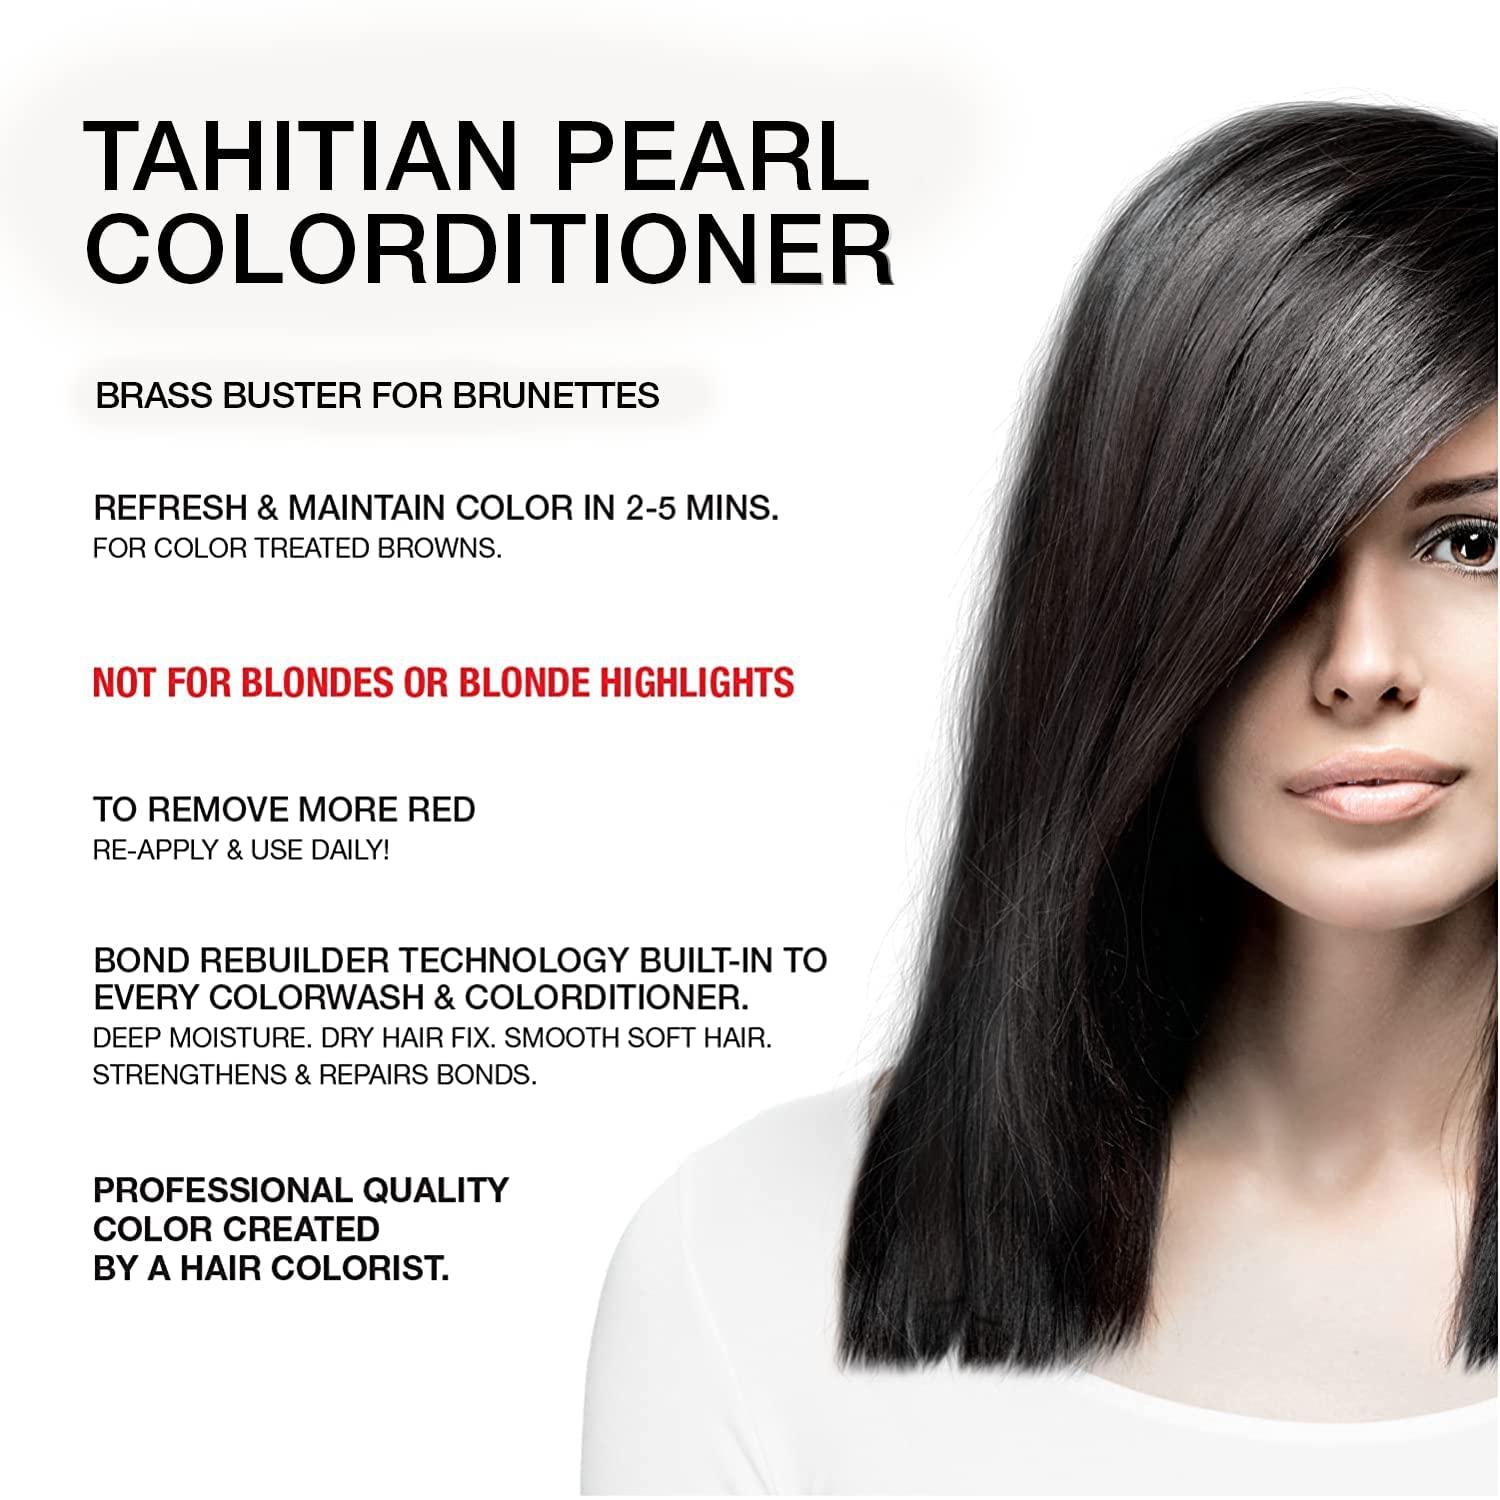 Celeb Luxury Gem Lites Brown Tahitian Pearl Colorditioner, Color Depositing Conditioner with Bondfix Bond Rebuilder, Semi Permanent Hair Colour Glaze, Removes Unwanted Warmth in Brunettes